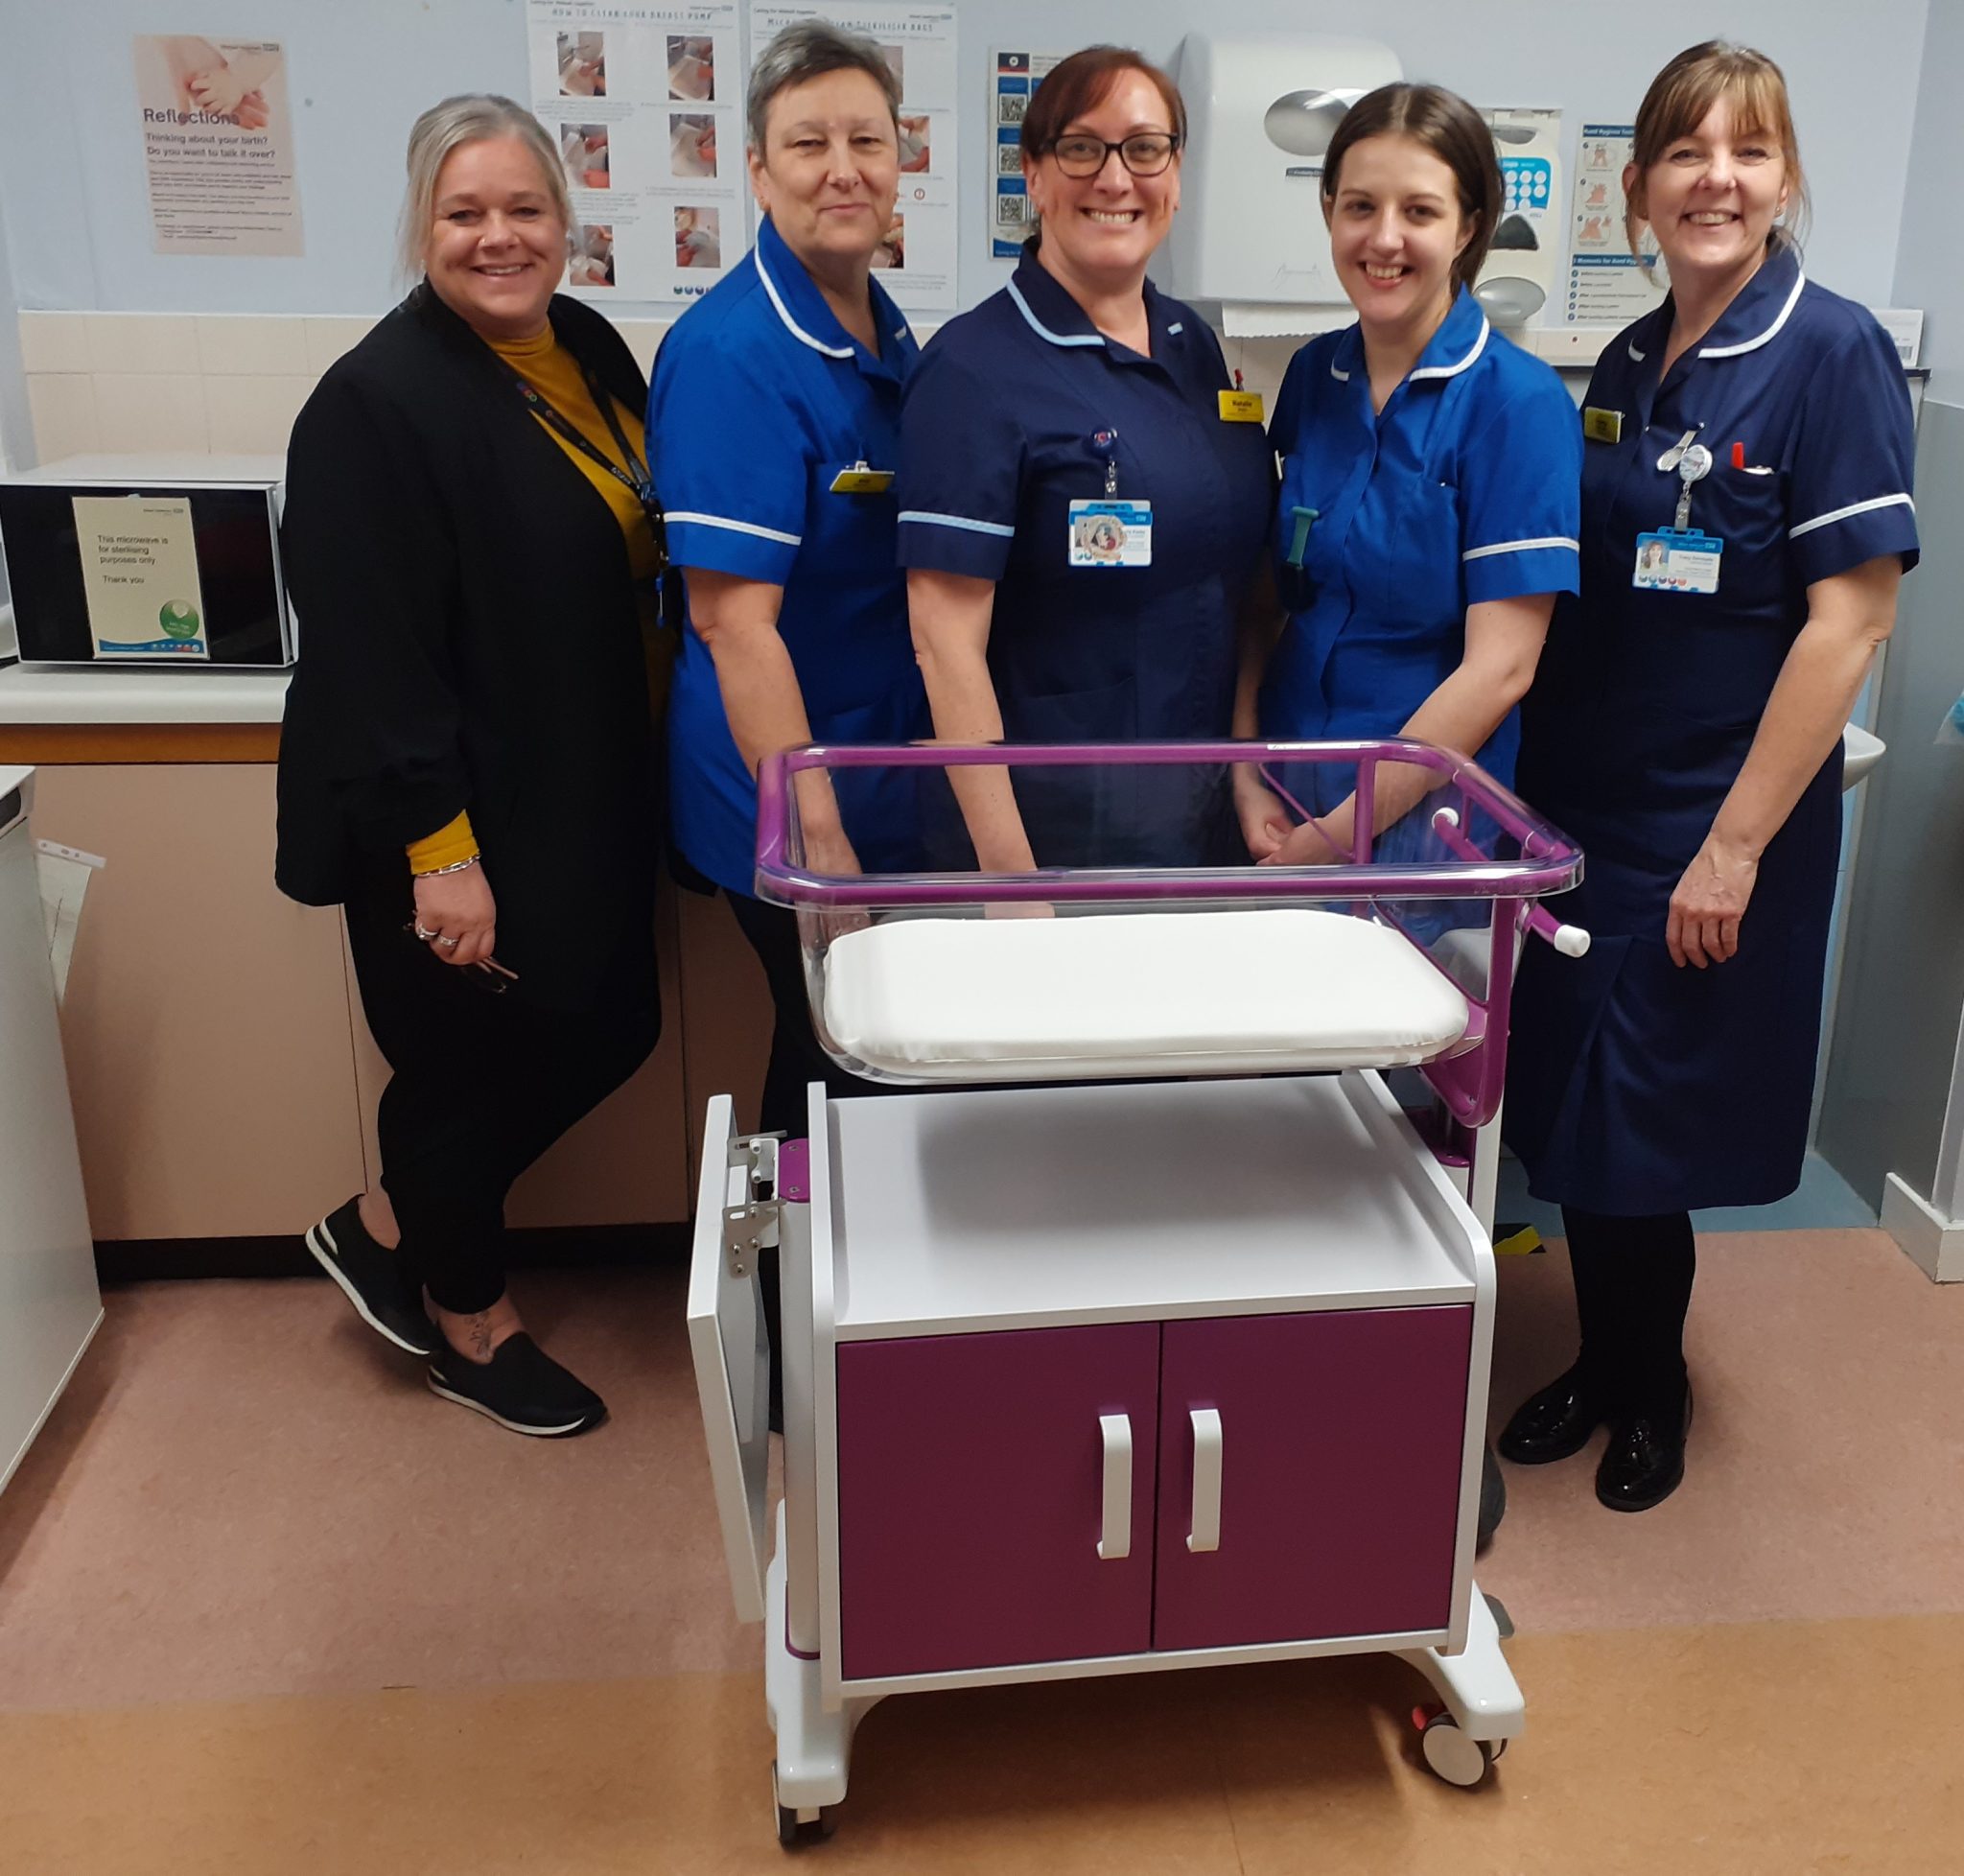 Fundraising Manager Georgie joins Midwives to see the new cot